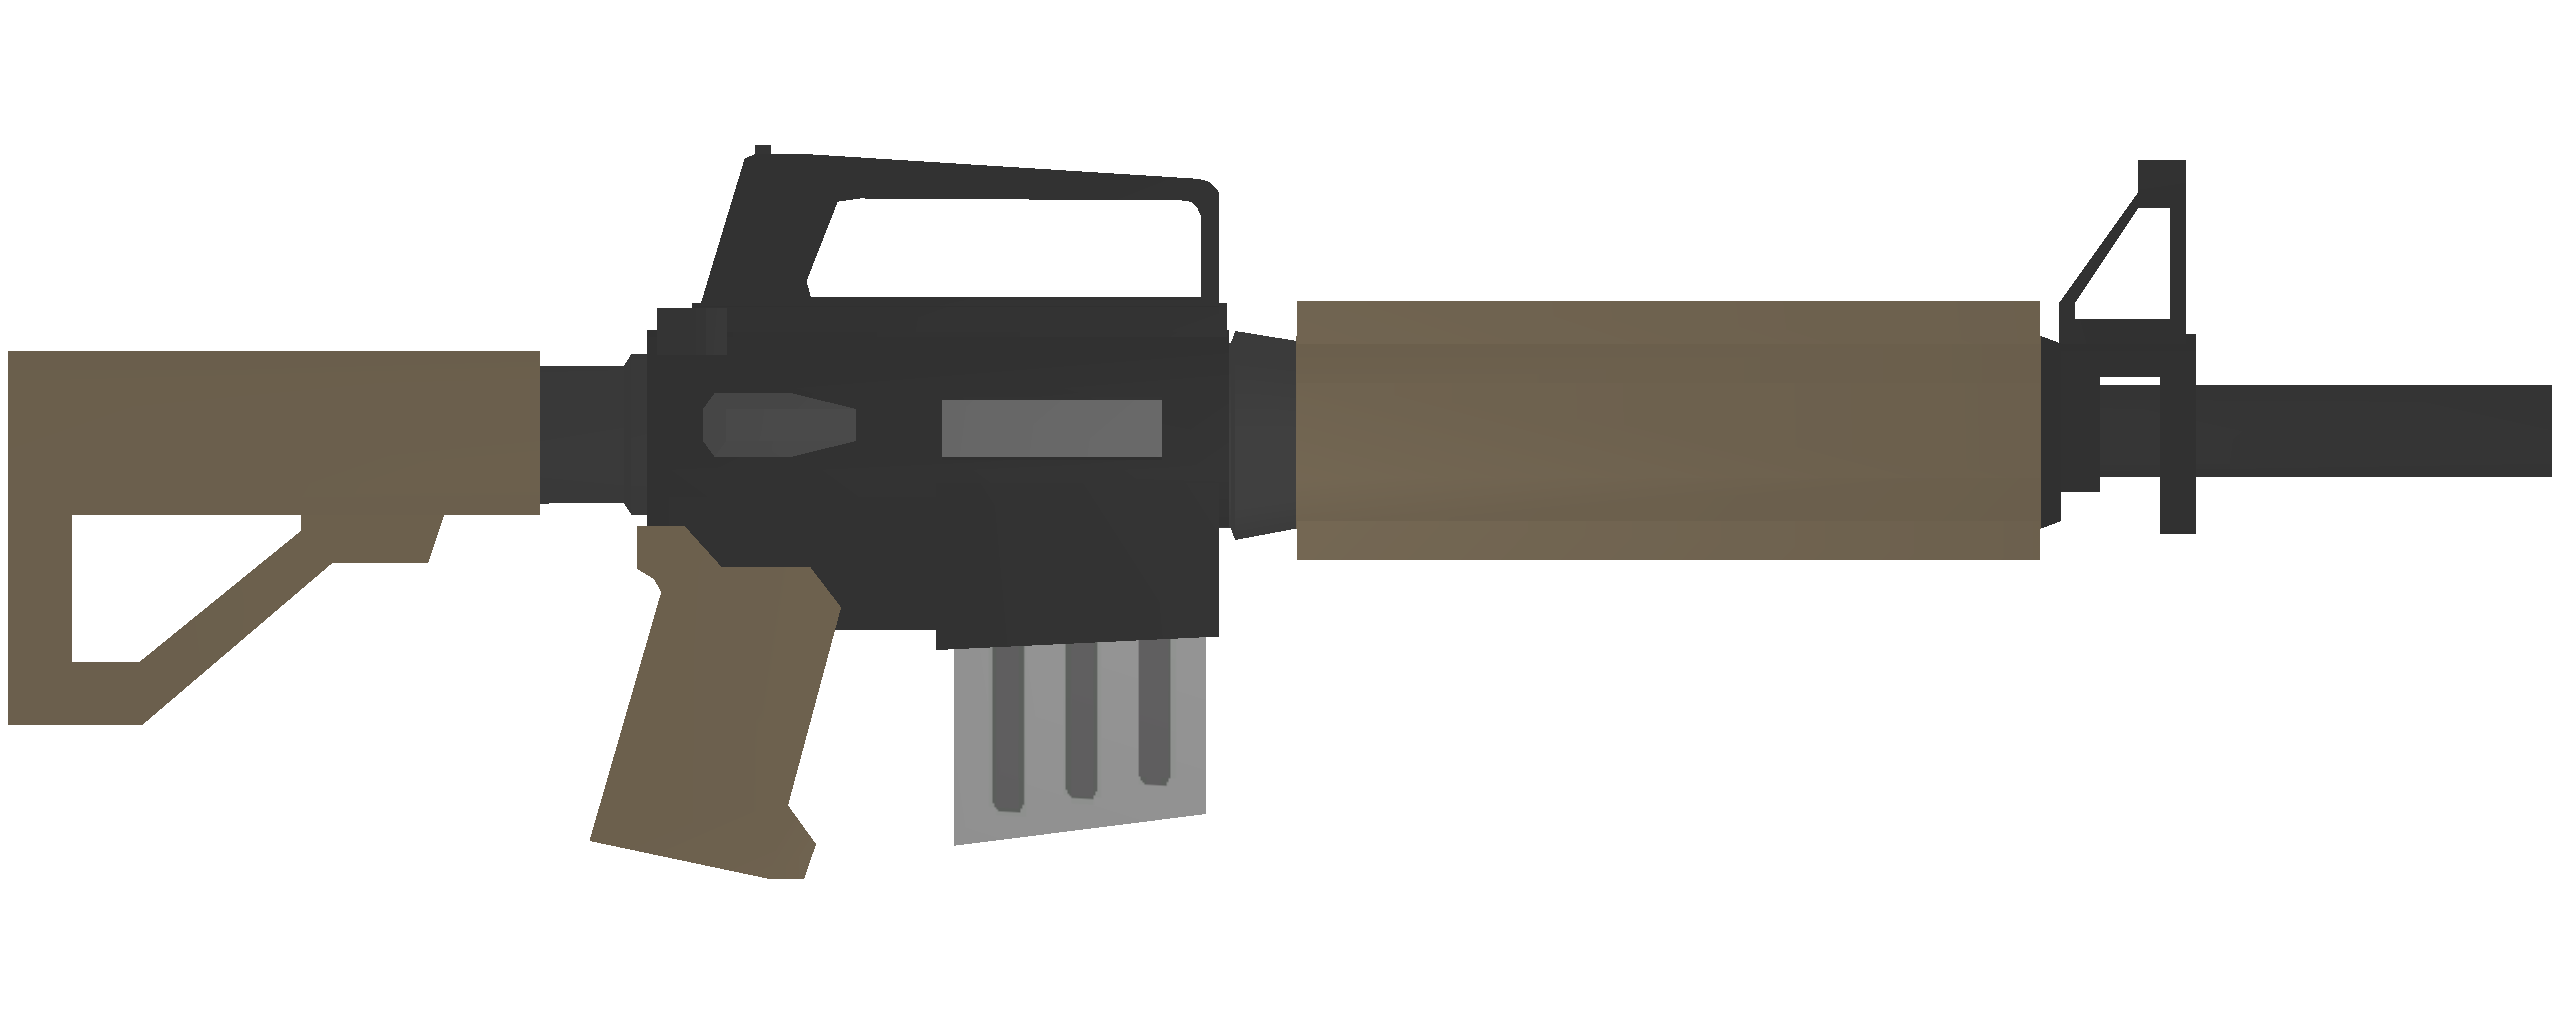 Unturned - Kuwait Items Redux + ID List for Magazines and Attachments - Assault Rifles - A87256F